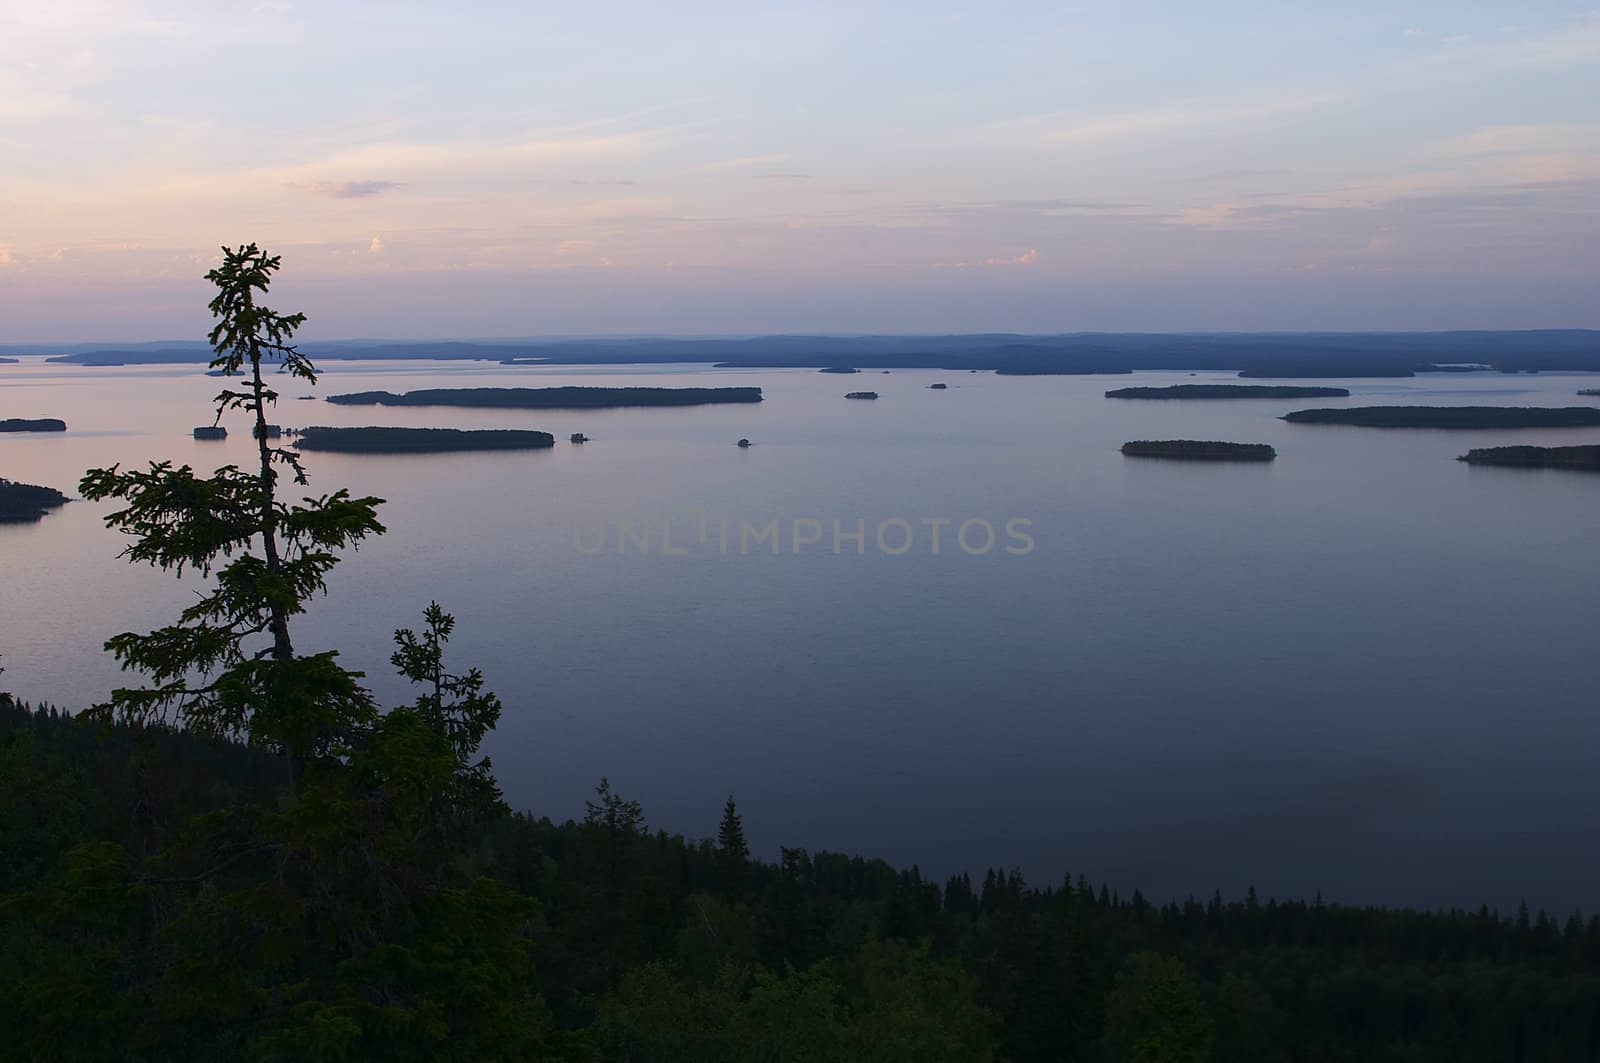 Sunset view from the top of Koli, Finland